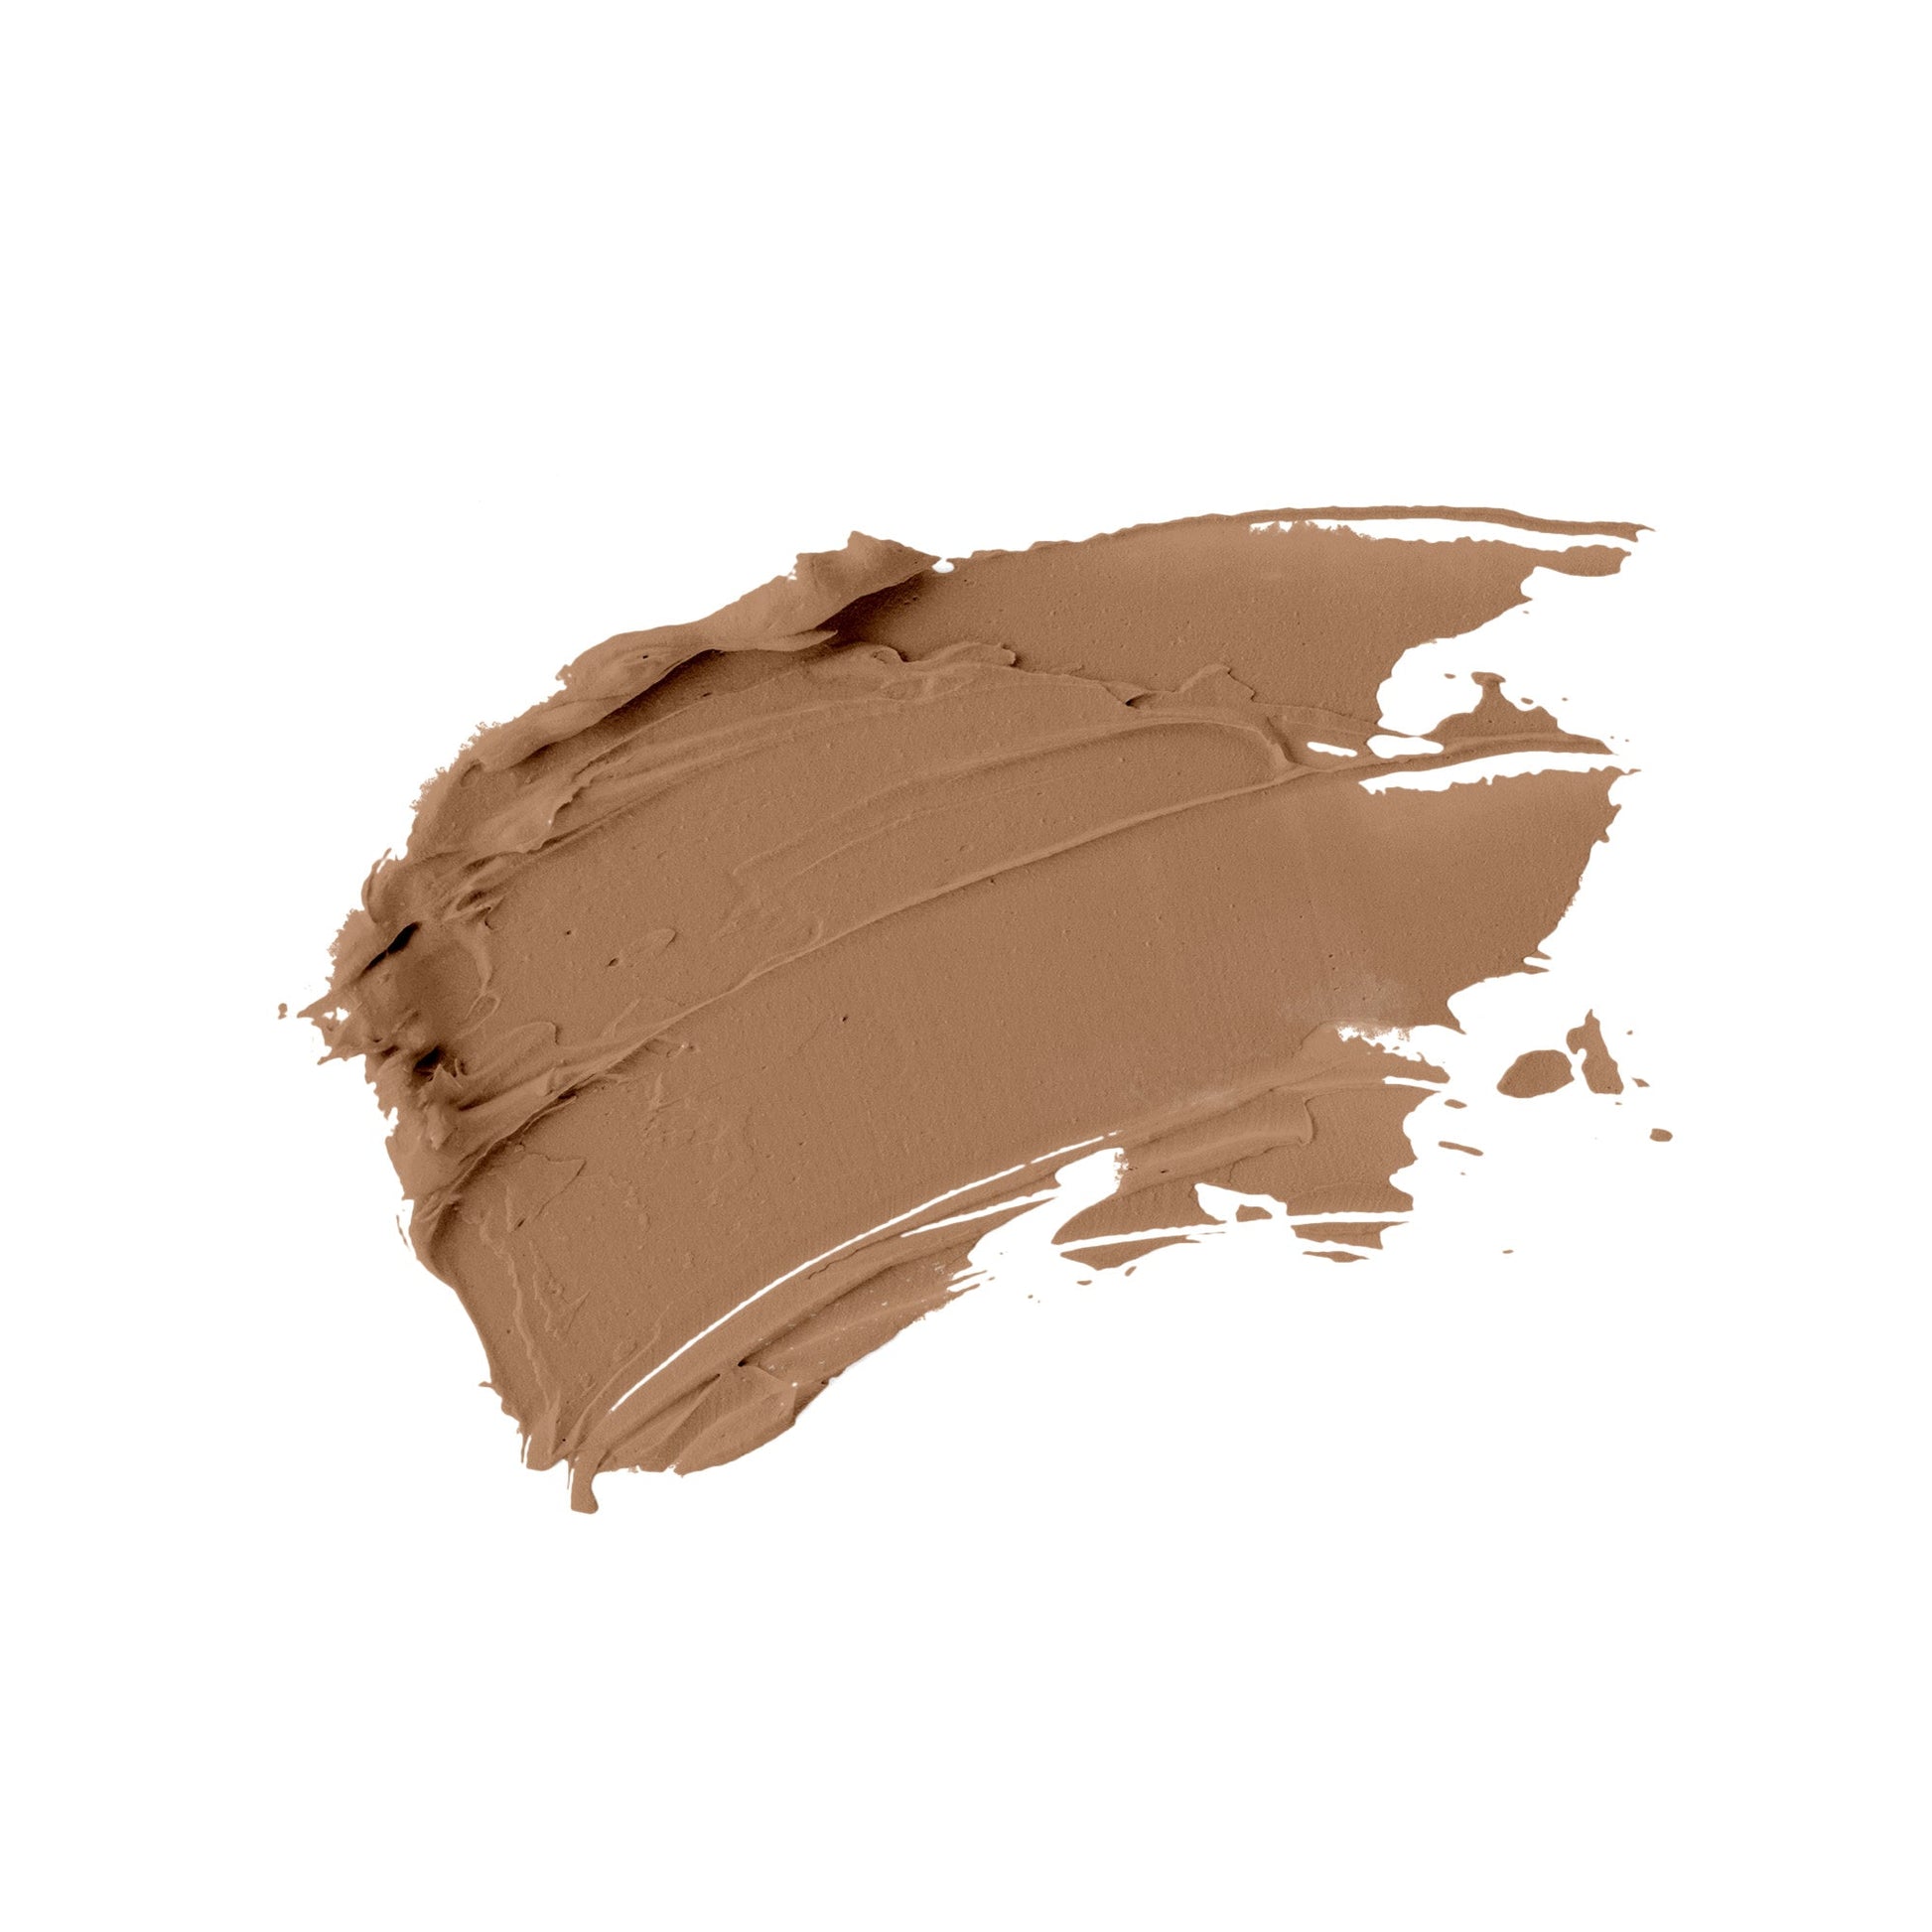 Swatch of porcelain tone of an oil free natural non-toxic liquid foundation